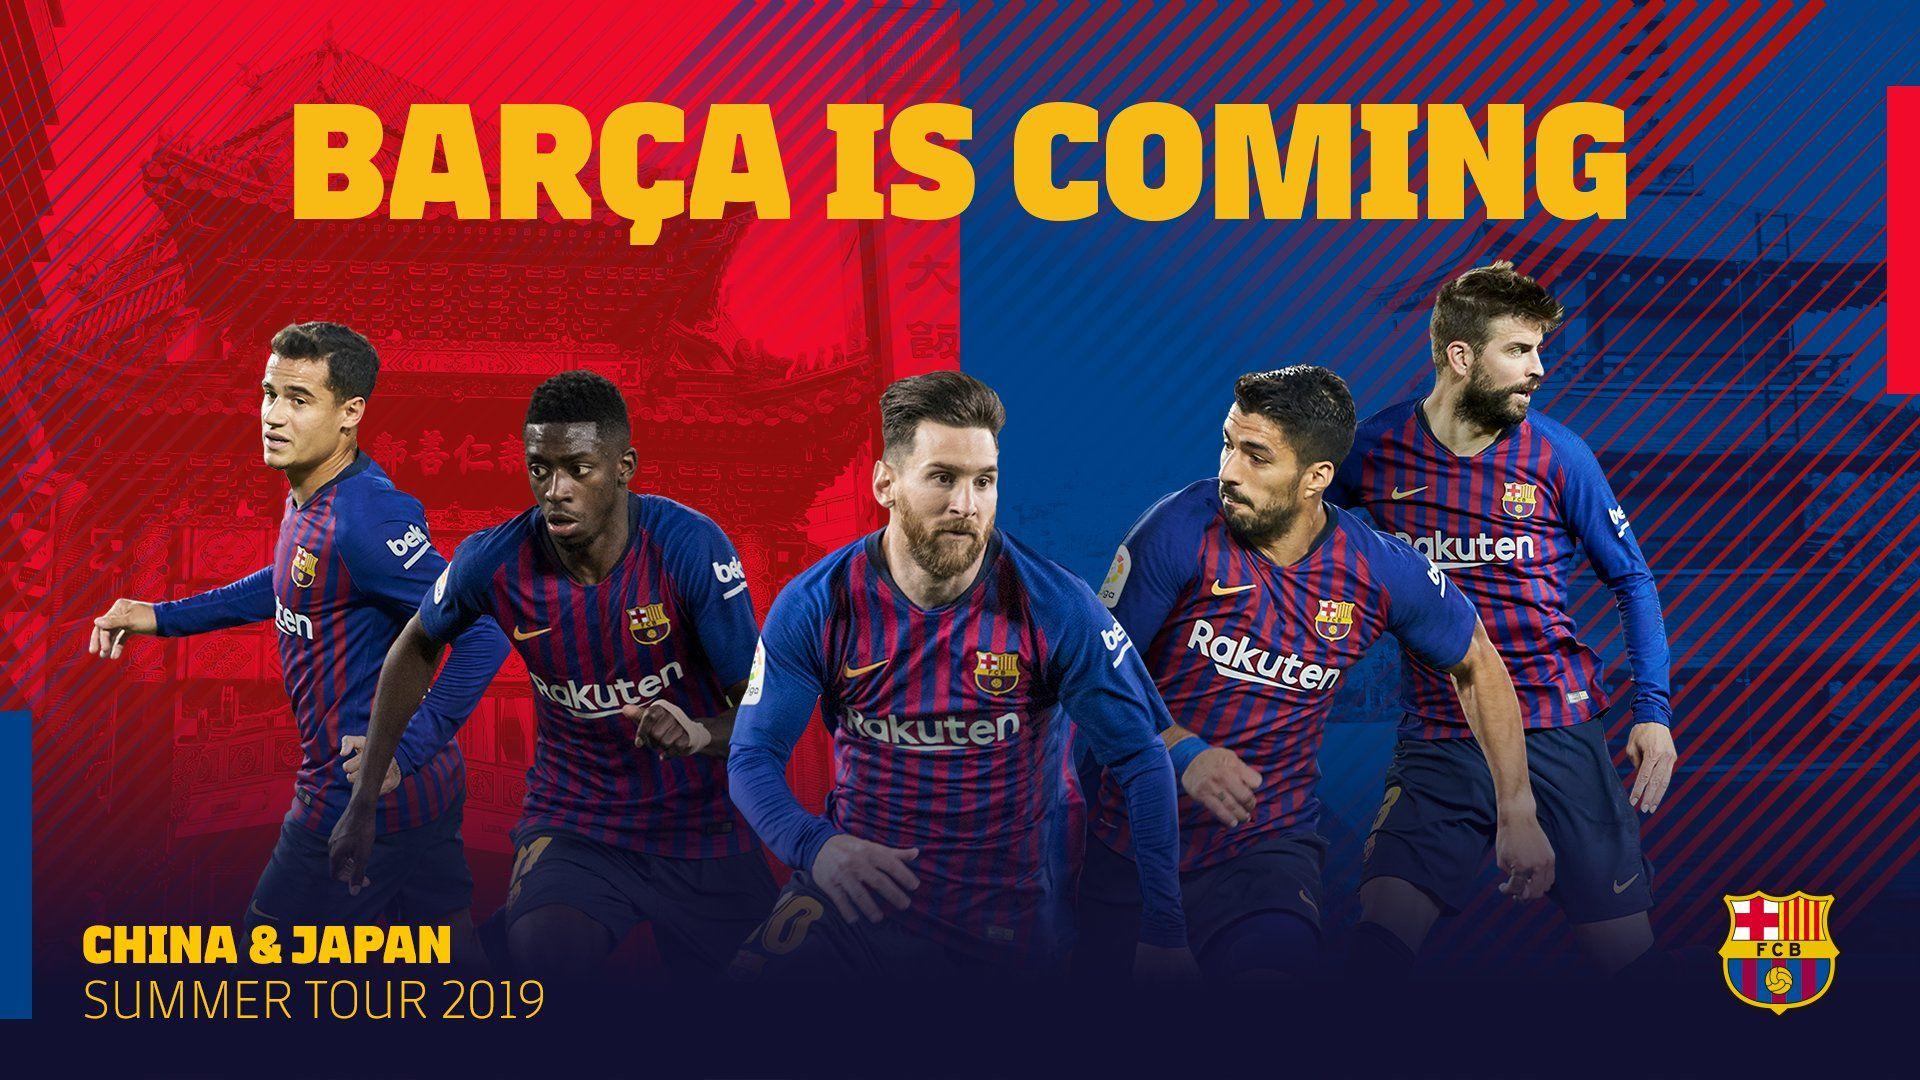 FC Barcelona - [BREAKING NEWS] Barça will be going to